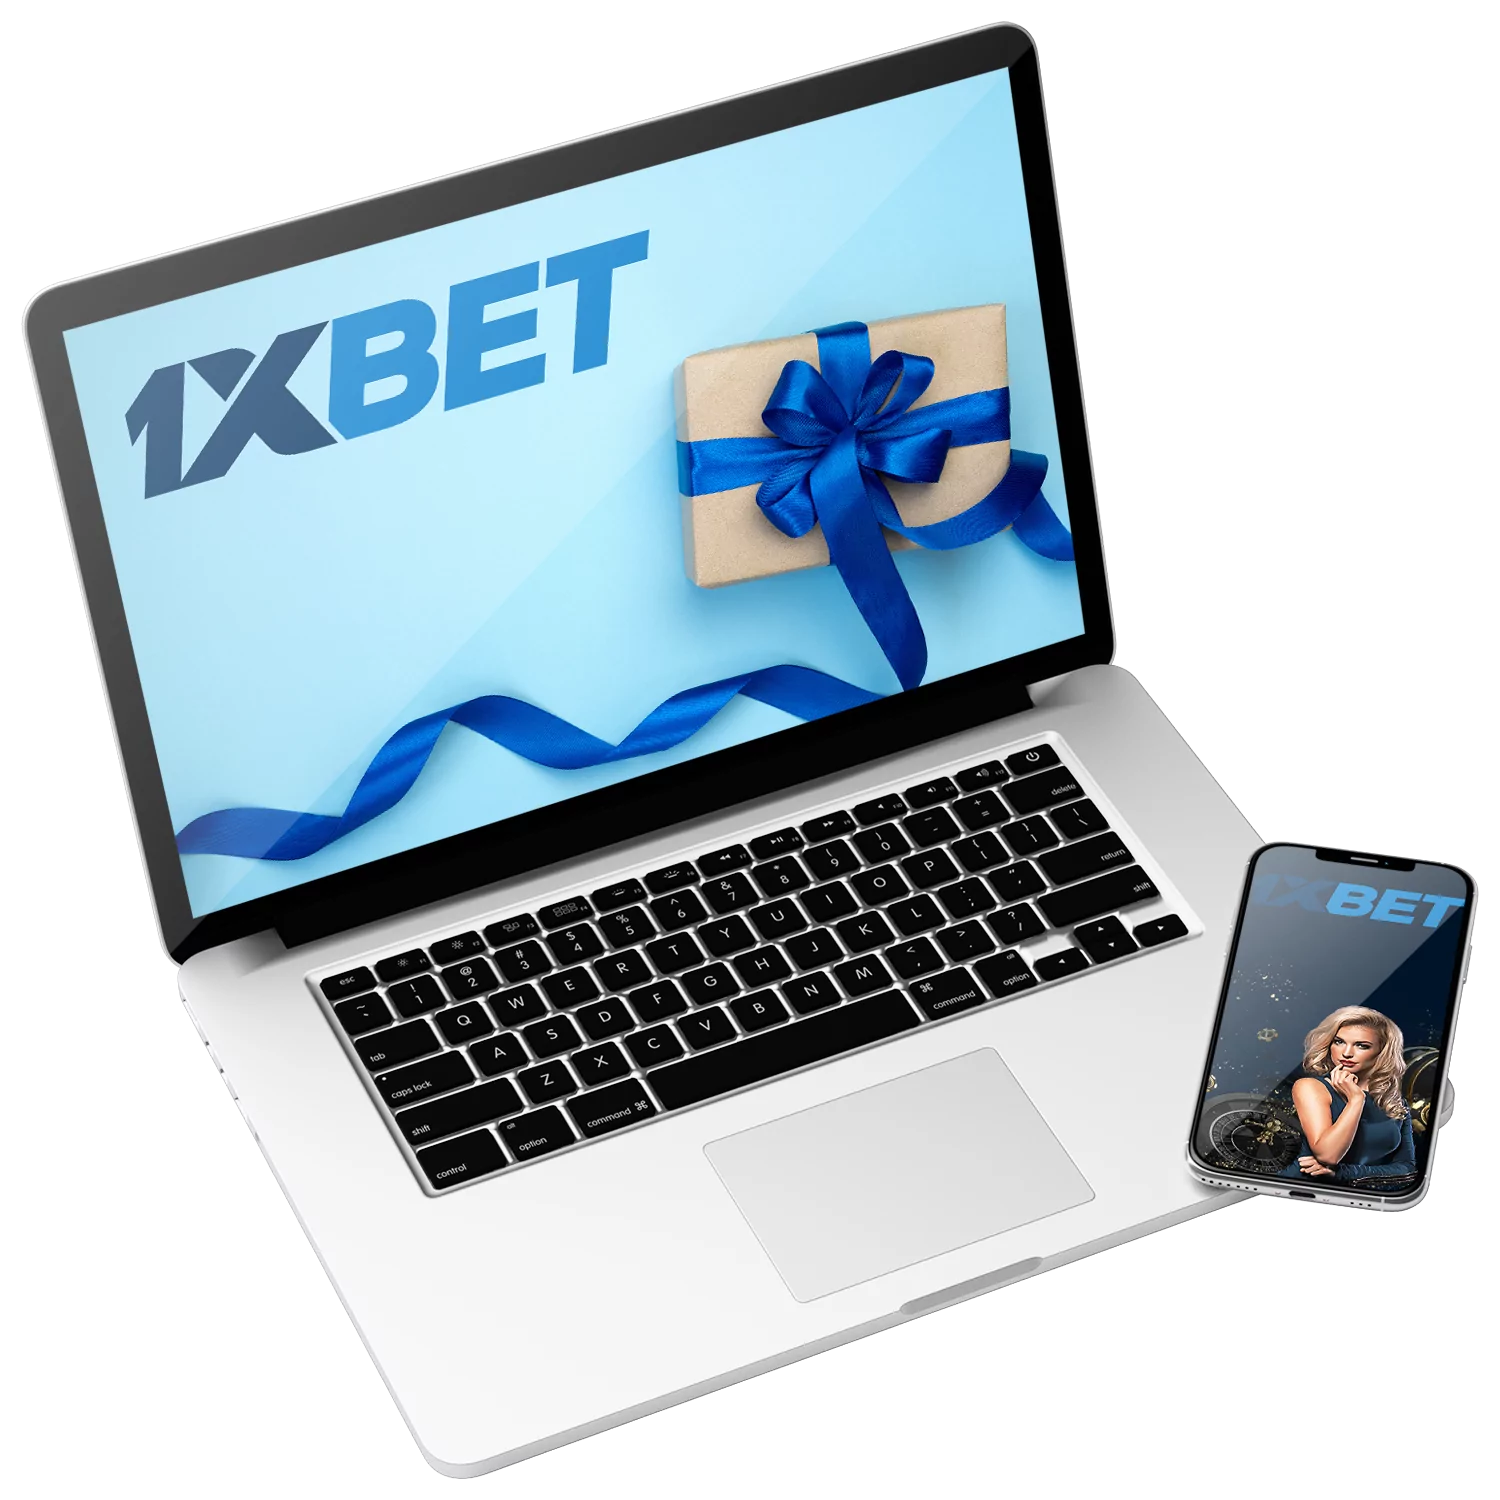 1xBet offers many bonuses for users from India.